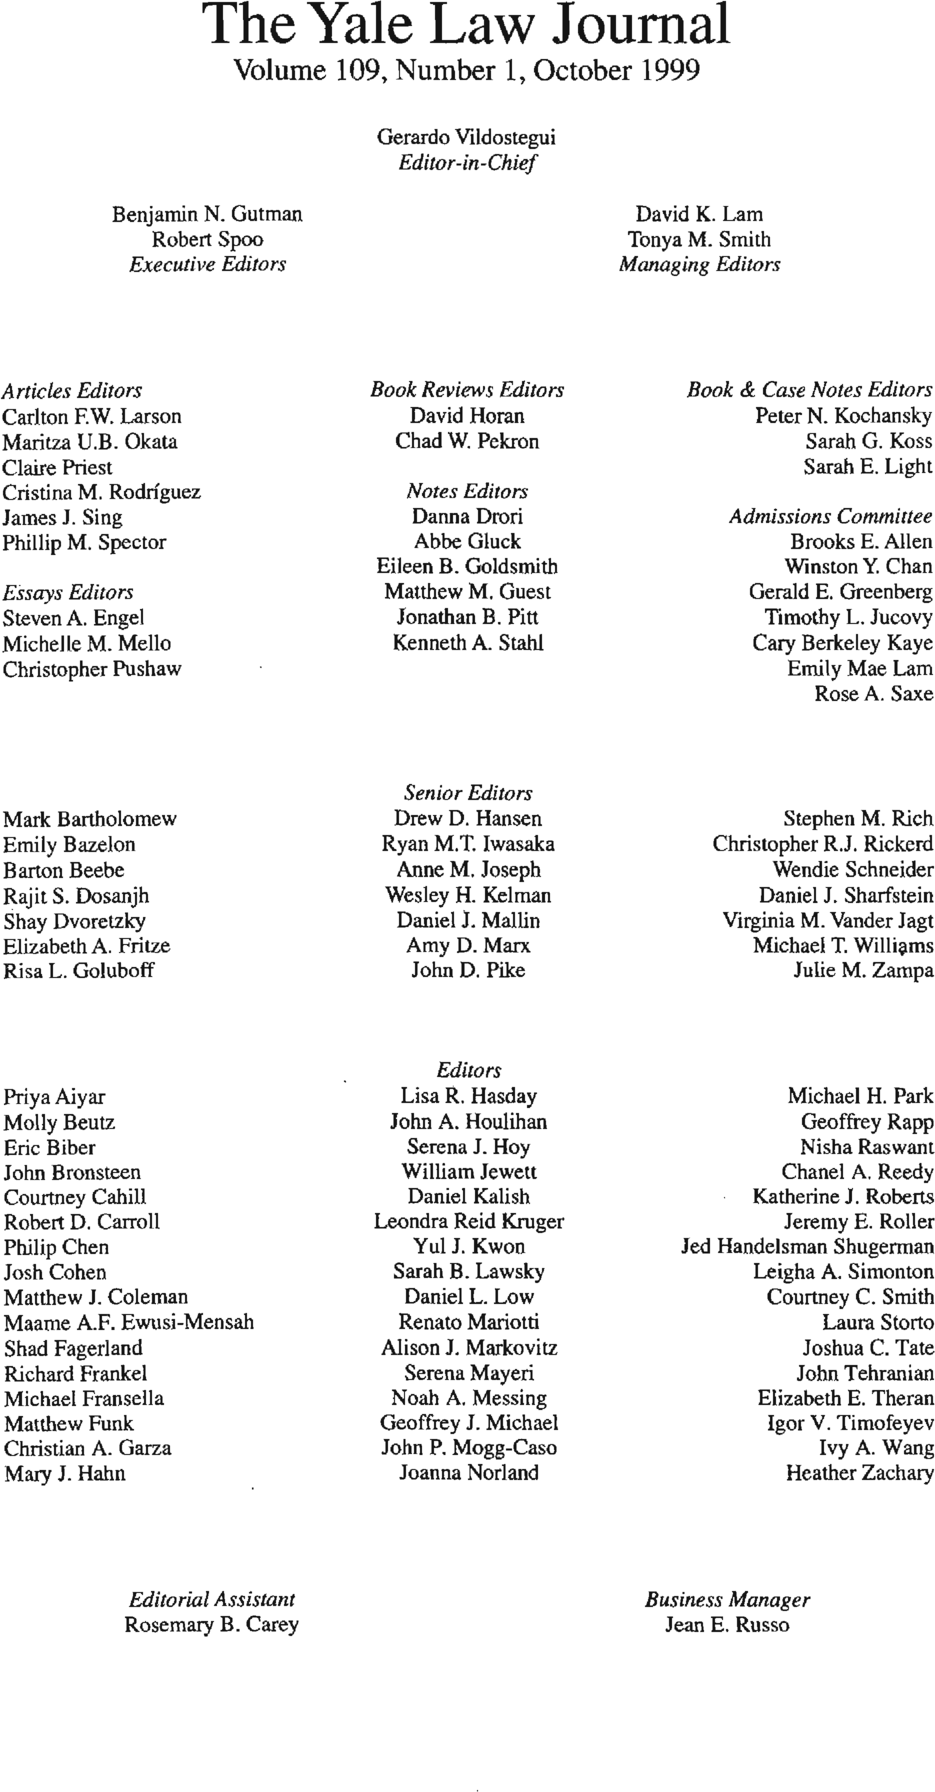 The Yale Law Journal Masthead Volume 109